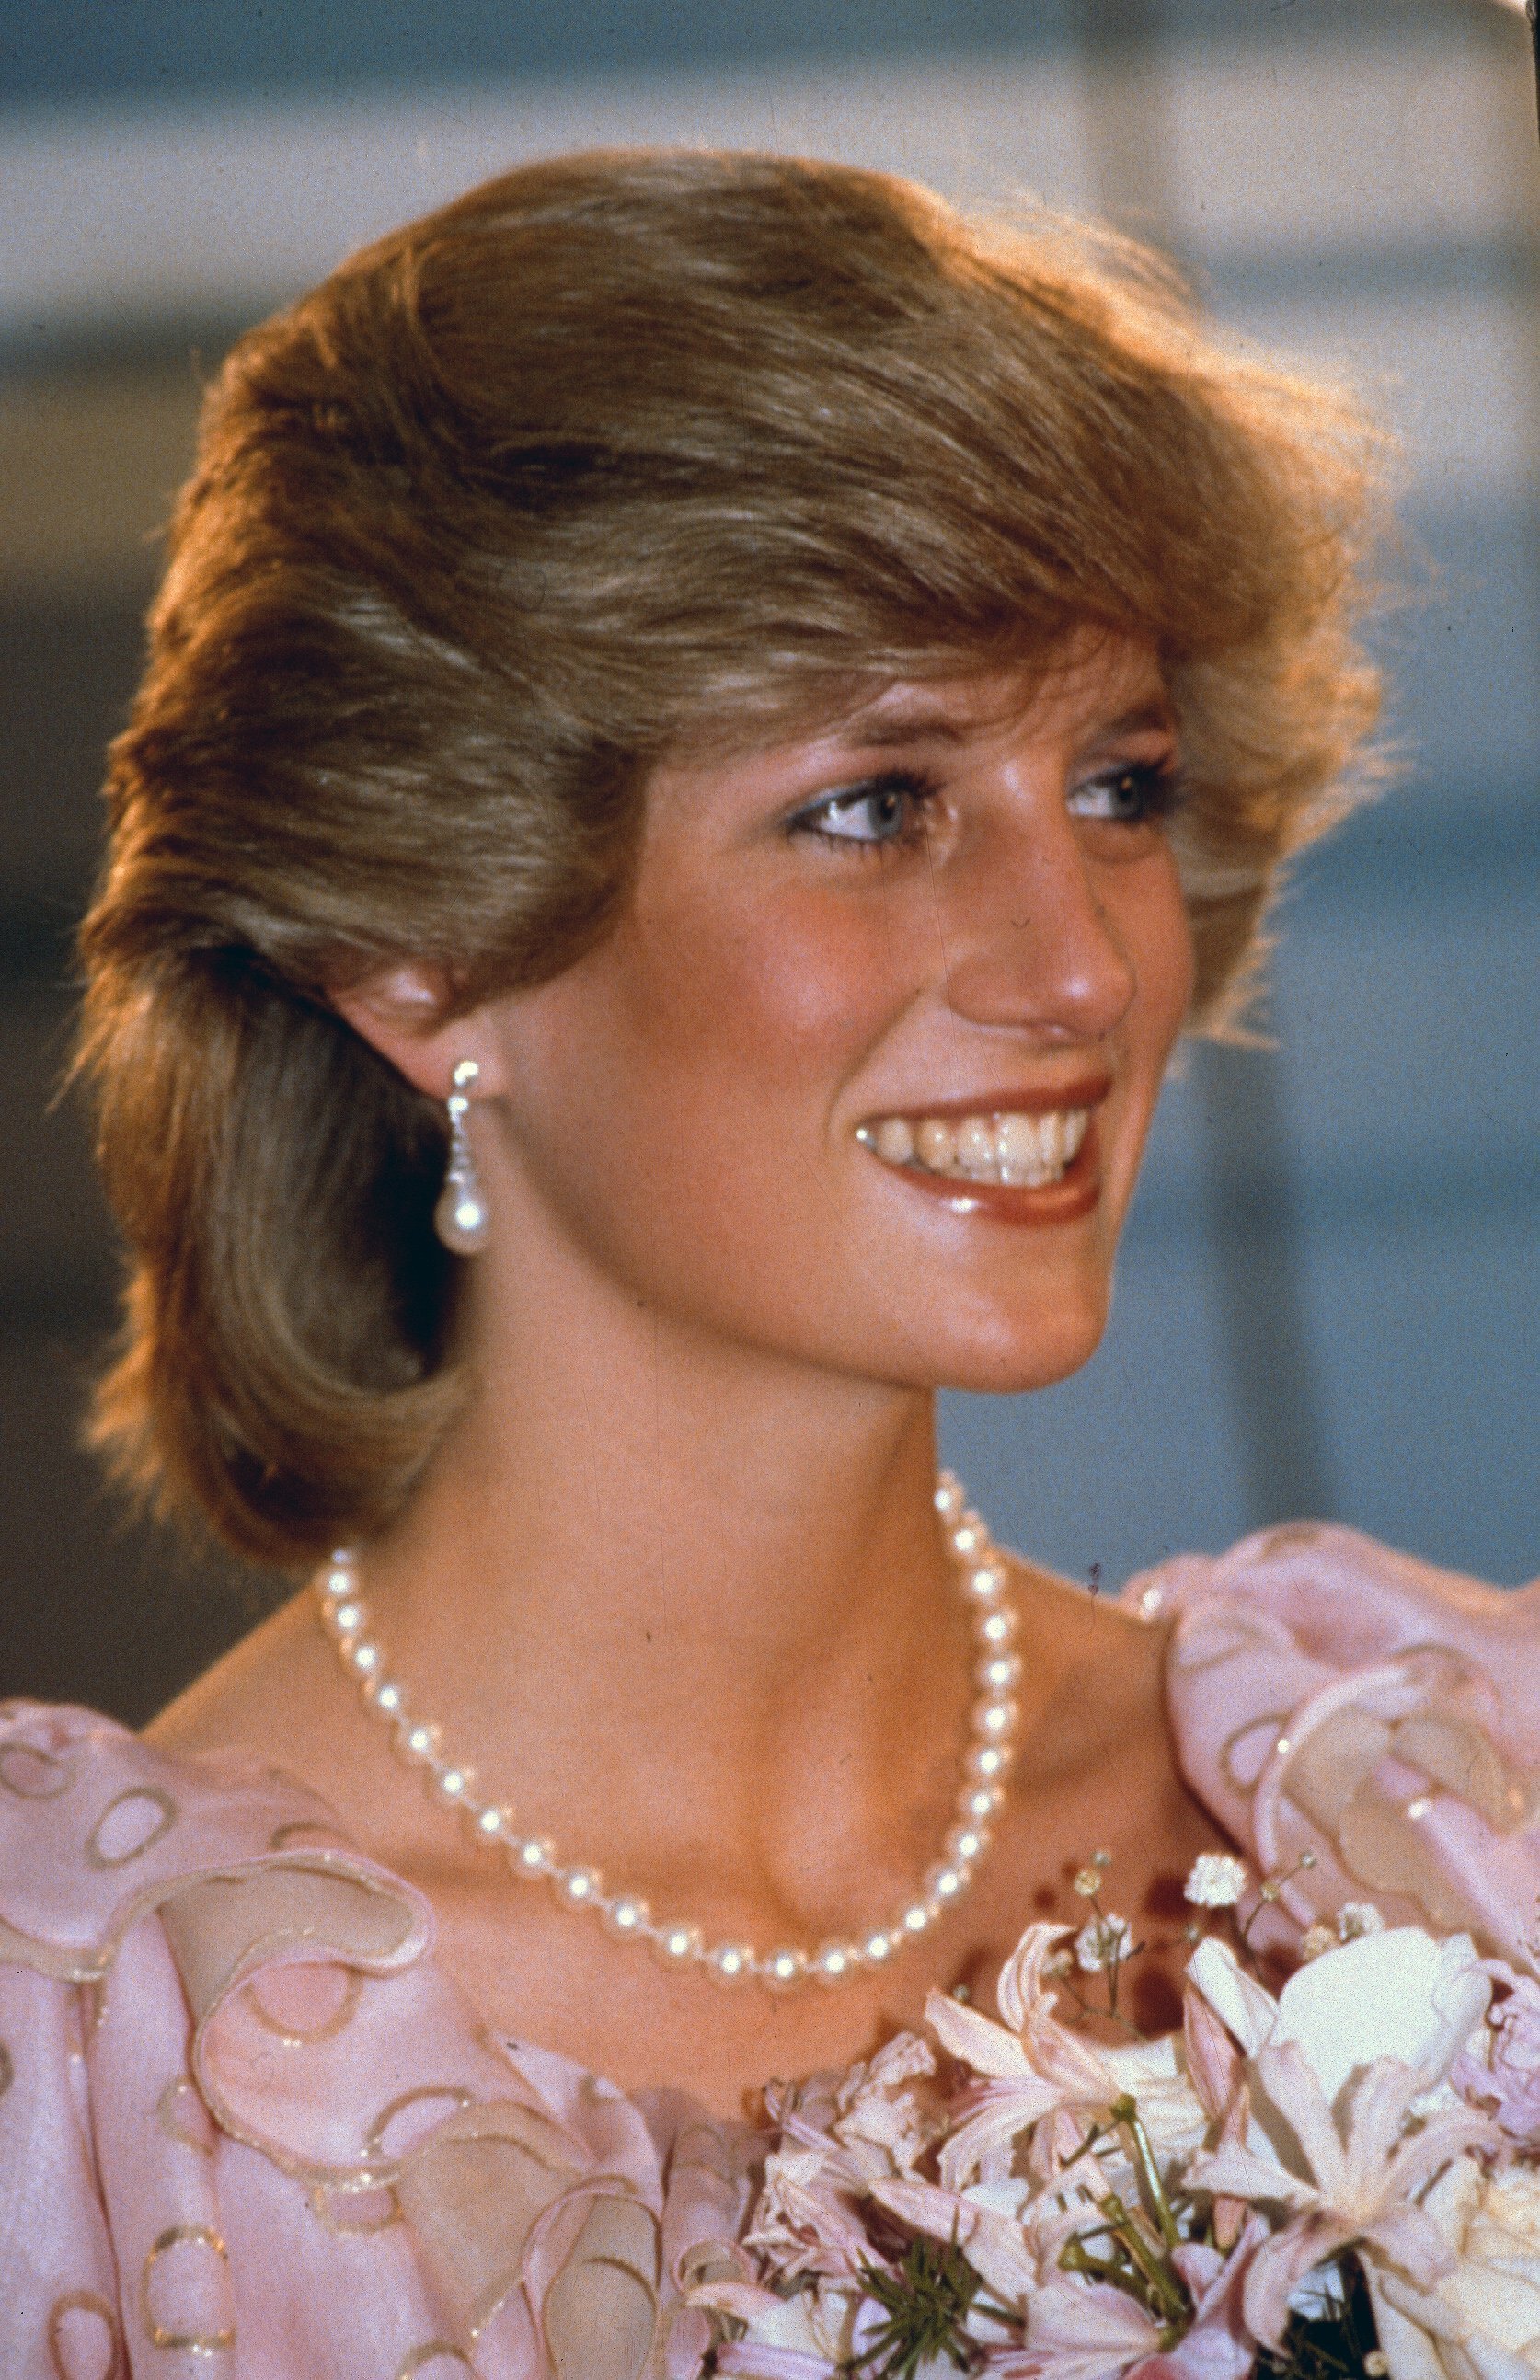 Princess Diana on April 14, 1983, in Melbourne, Australia | Photo: Getty Images